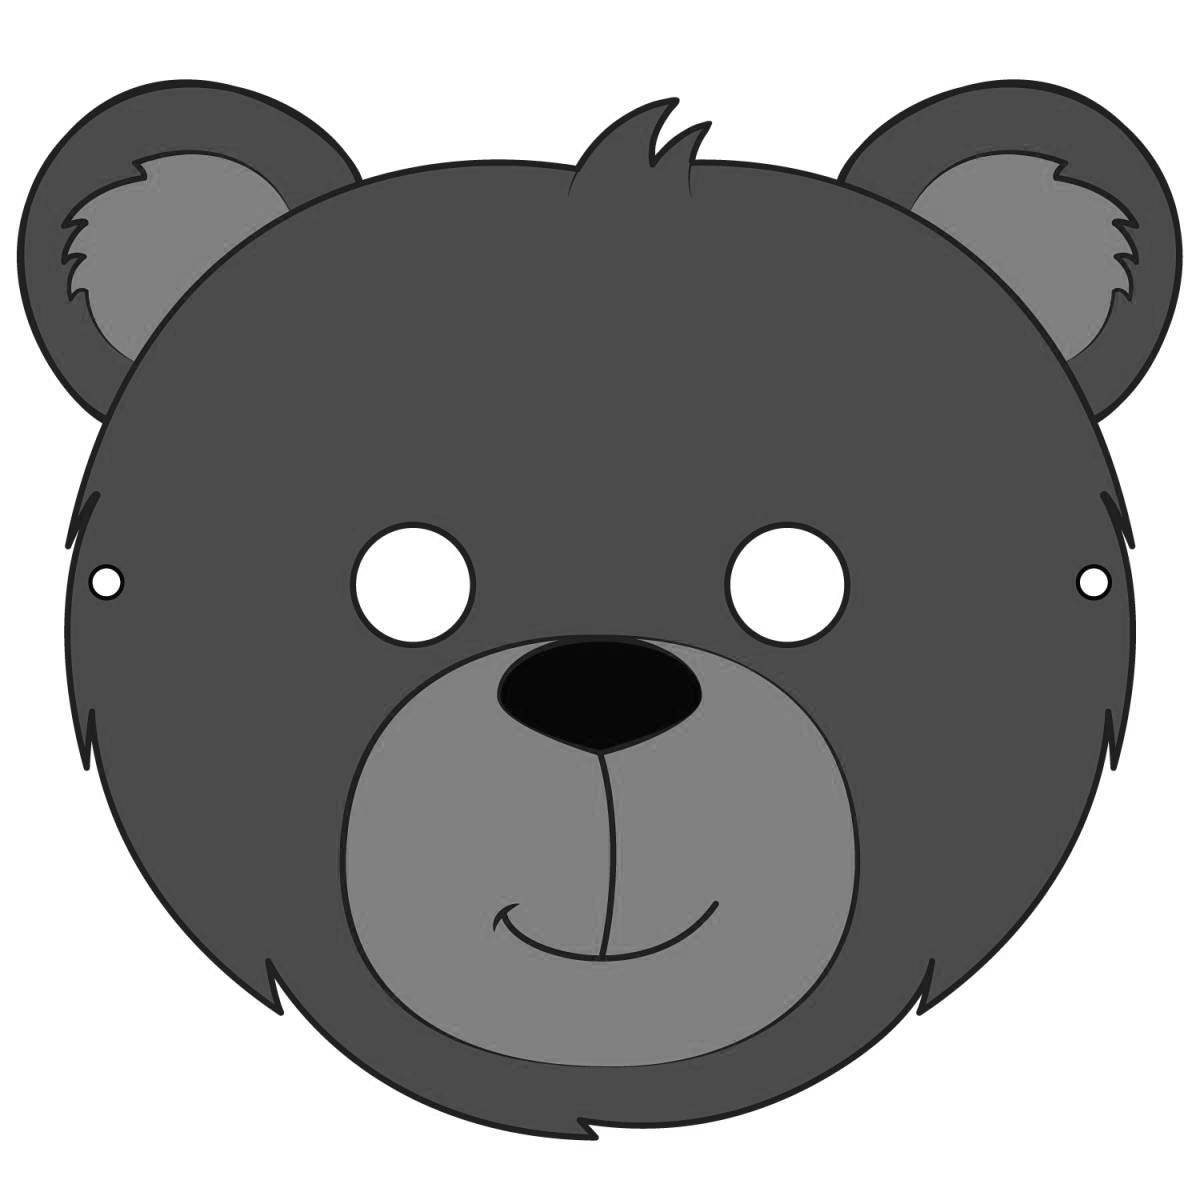 Glitter bear coloring page